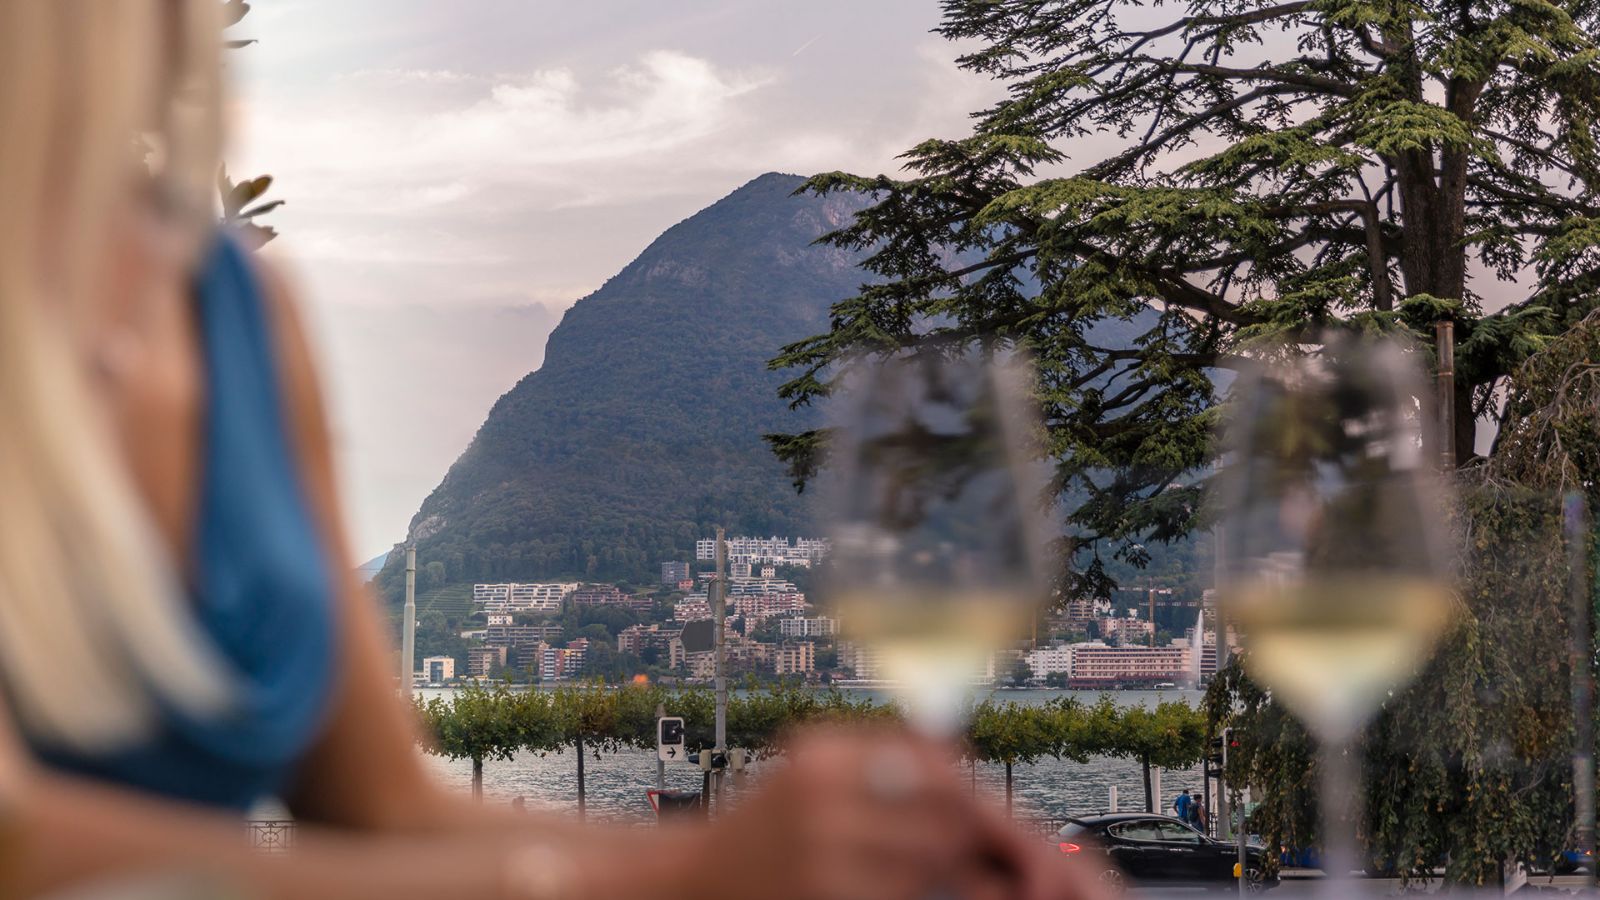 Aperitif with a view of Monte San Salvatore